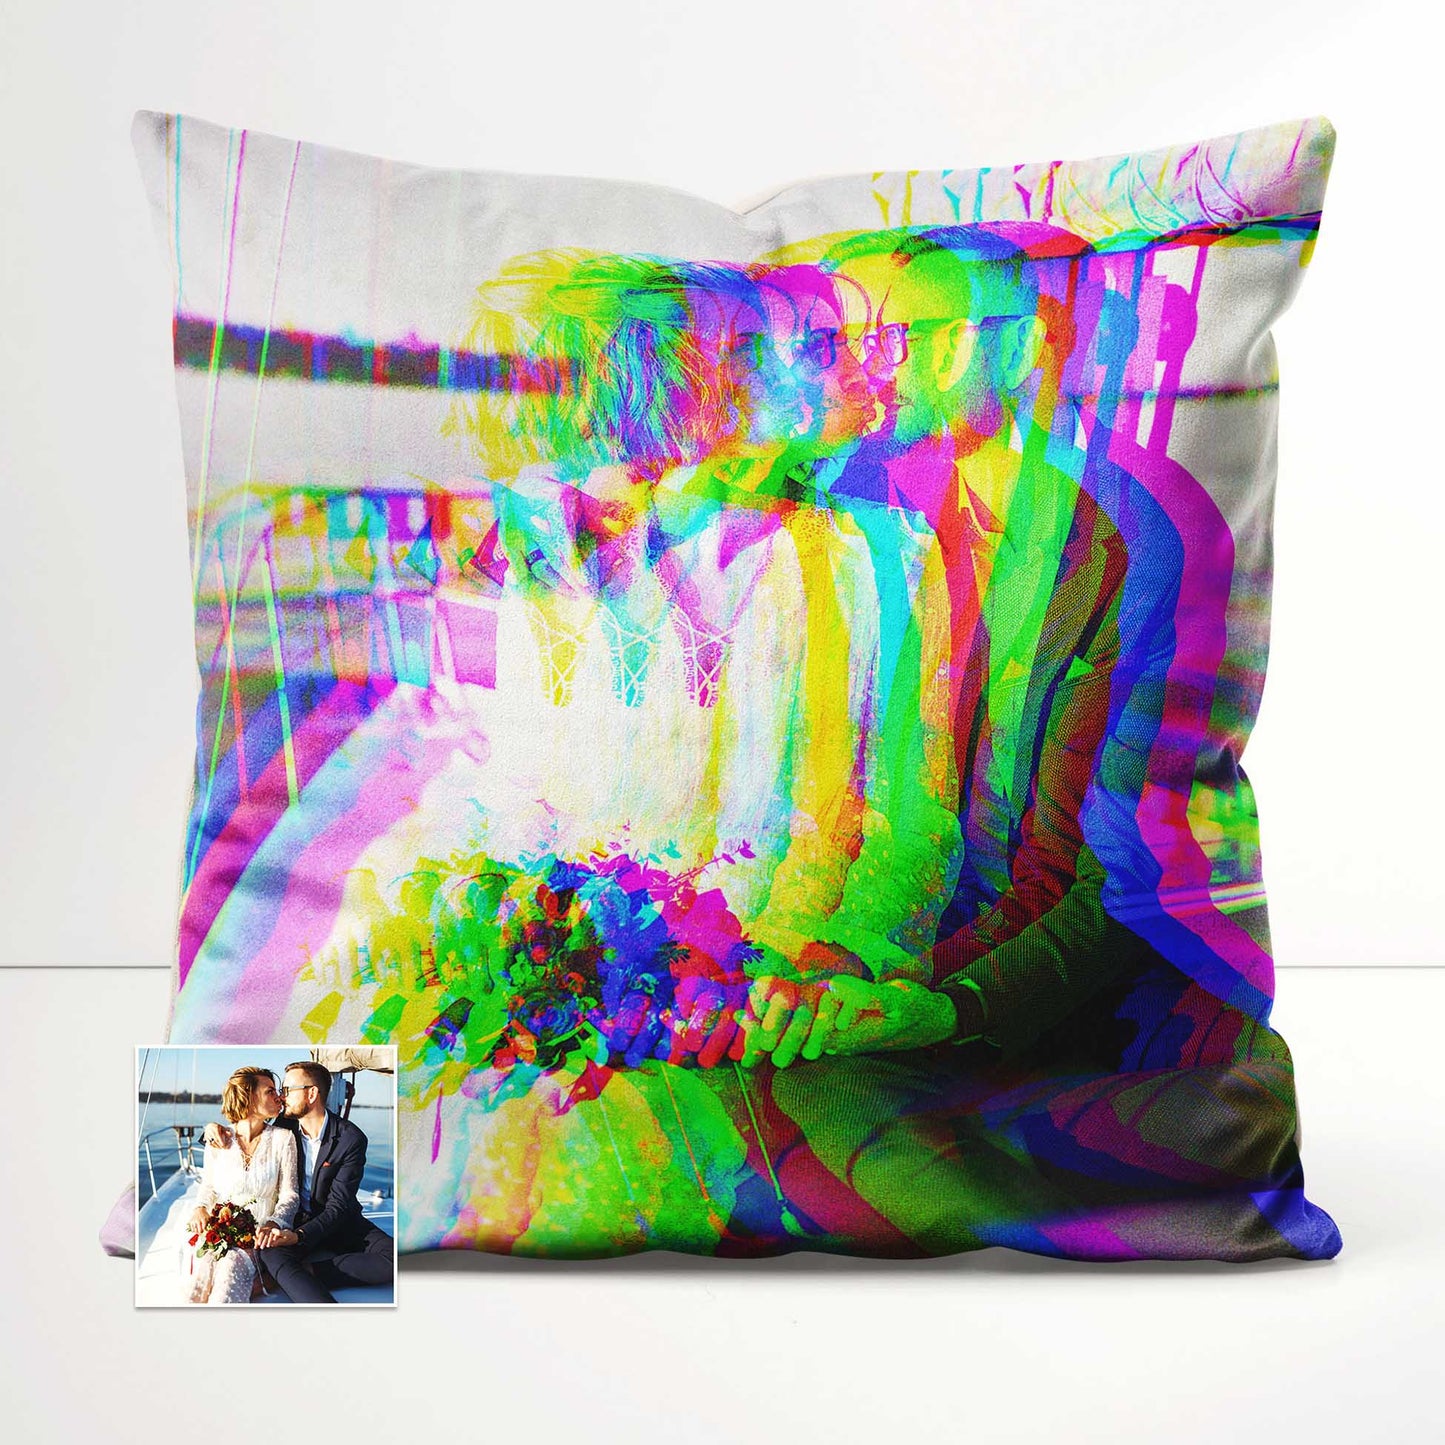 The Personalised Anaglyph 3D Cushion is a gateway to cherished memories. Made from luxurious velvet fabric, it envelopes you in comfort. The print from your photo adds an elegant touch, while the minimalist design blends seamlessly 